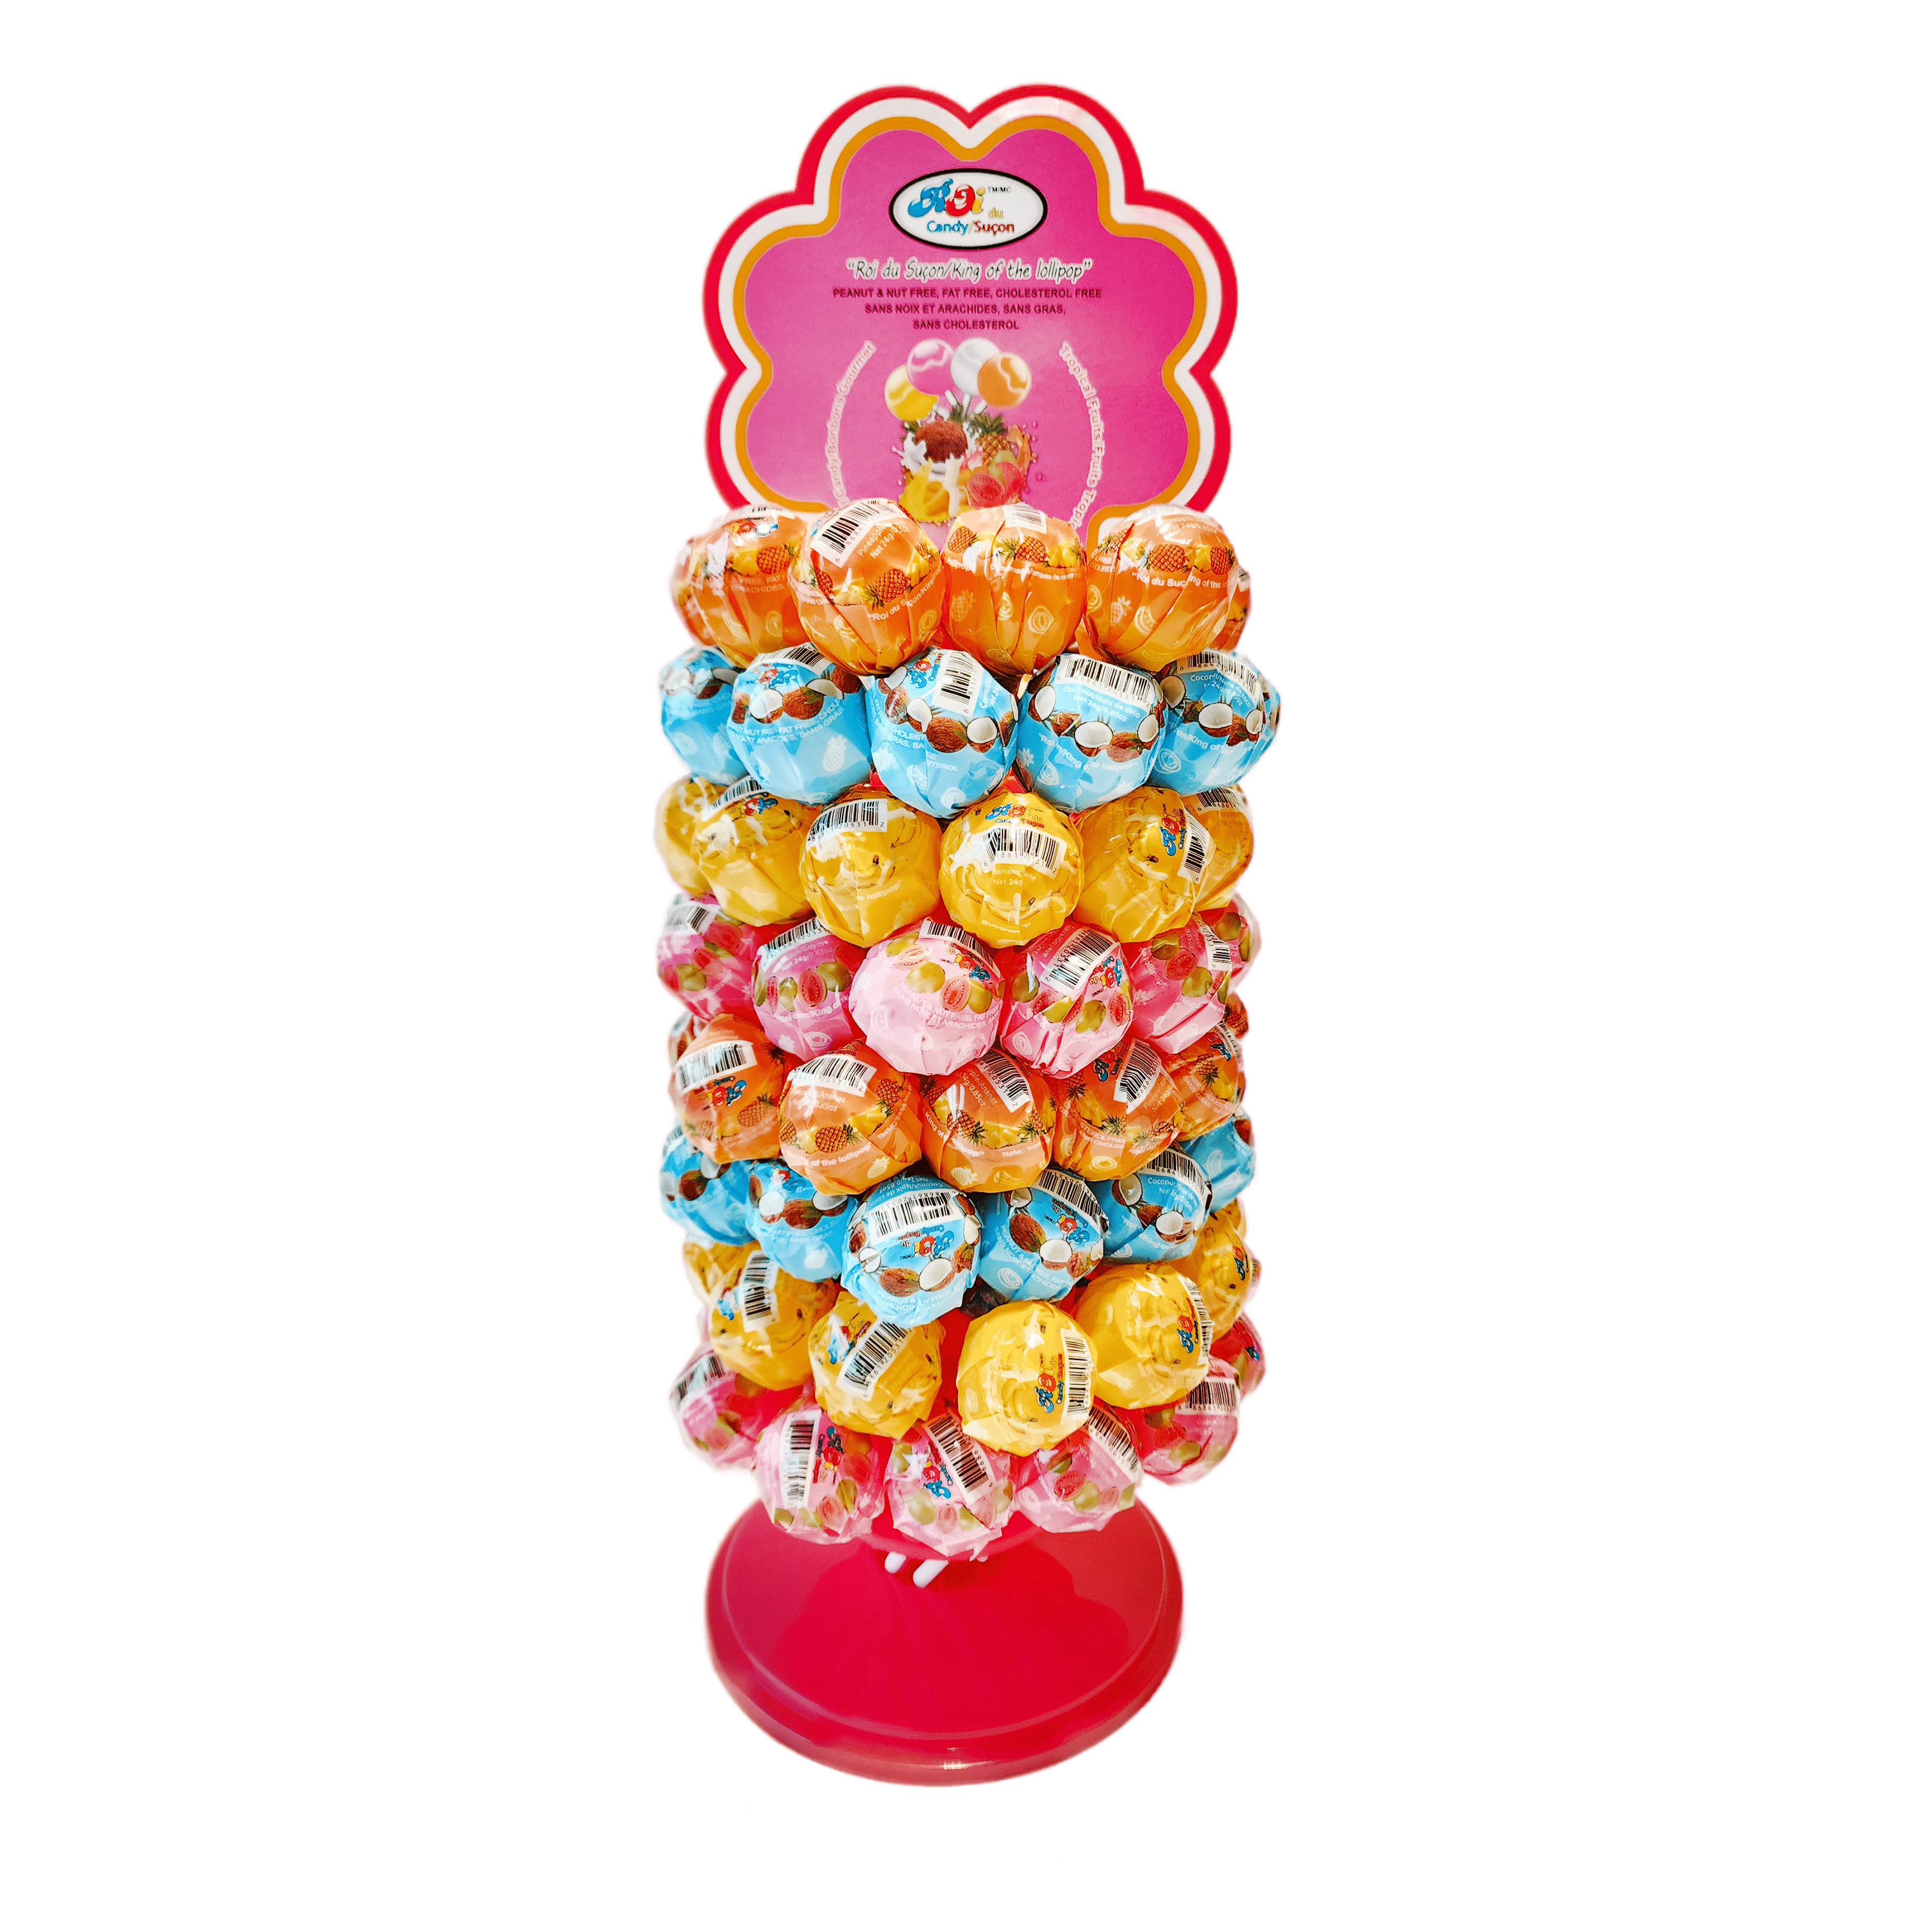 mini lollipop candies with four flavors of Guava, Coconut, Banana, and Pineapple in a jar. 100 pieces per jar